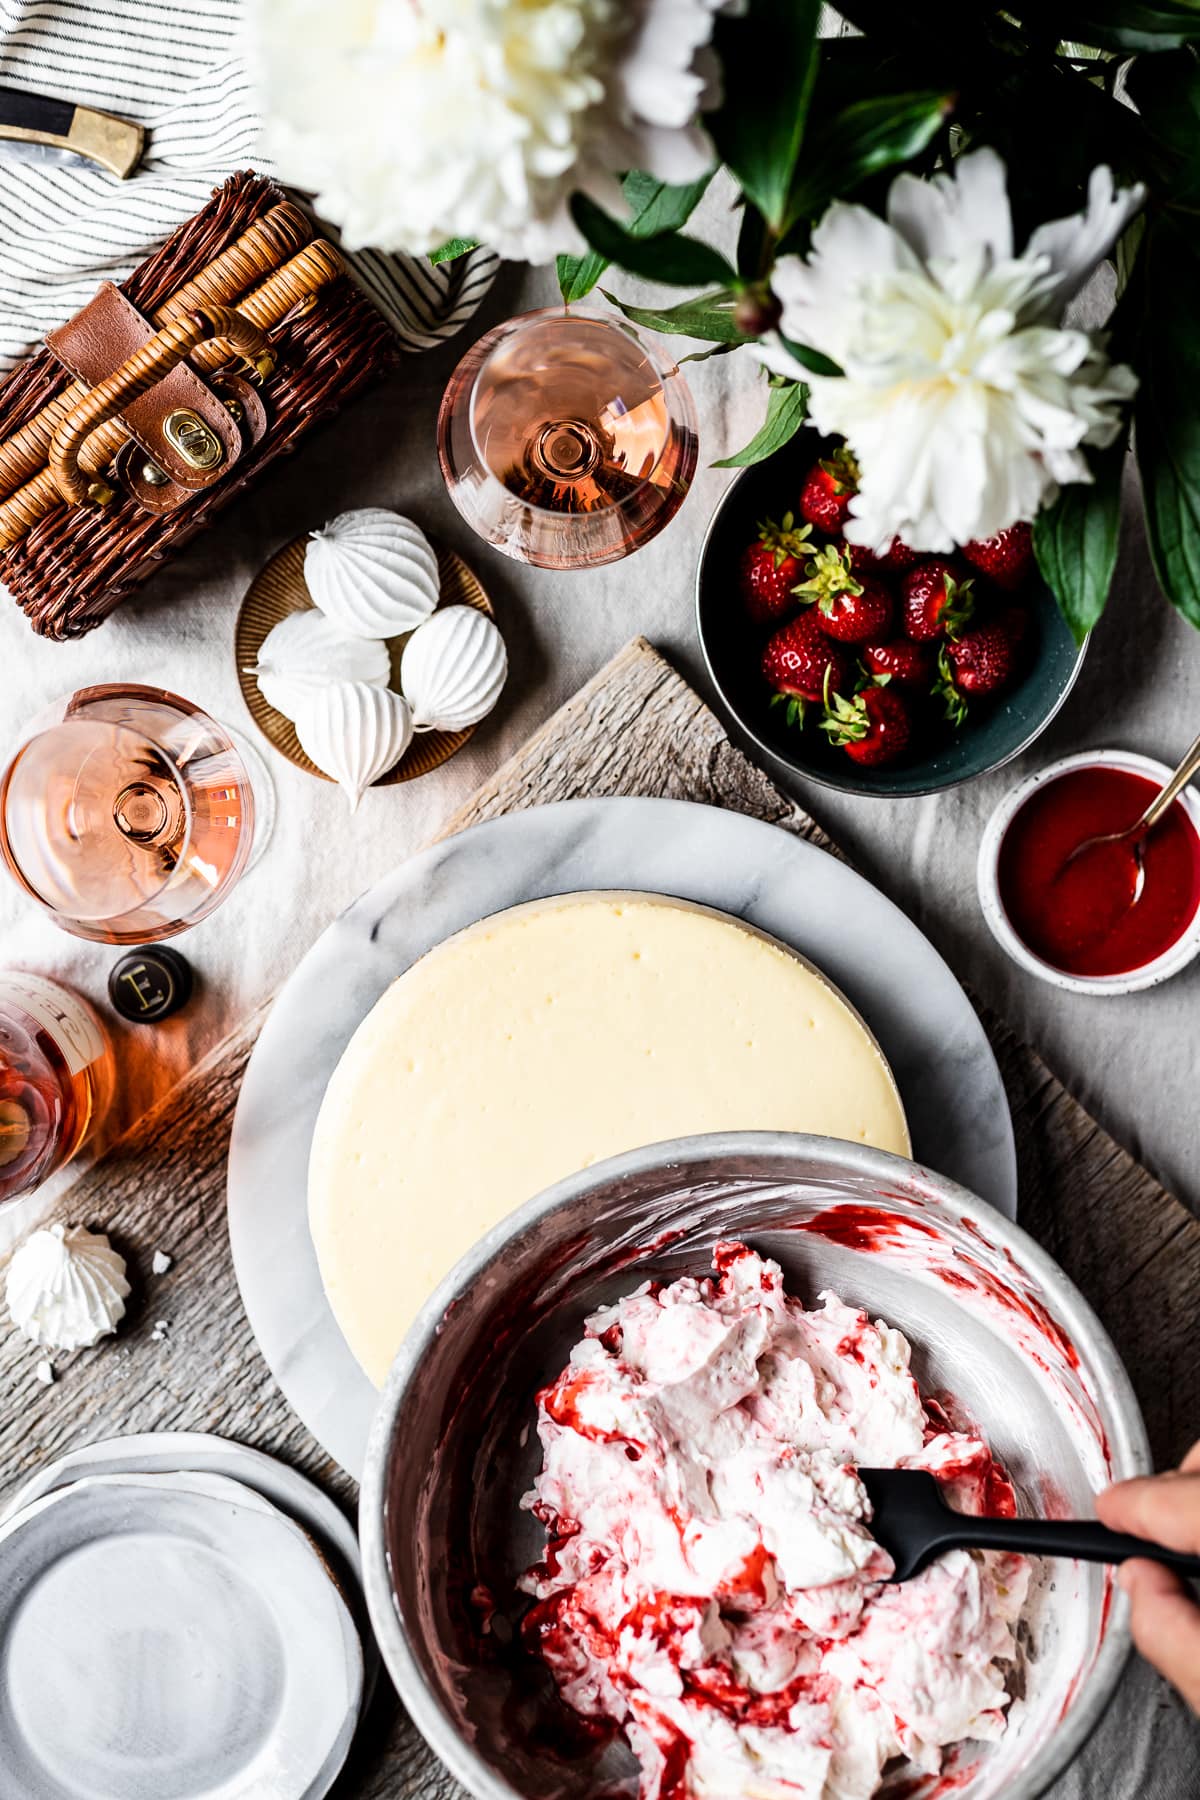 Top view of whipped cream meringue topping being placed onto the cheesecake. The cheesecake rests on a marble platter on a rustic wooden board. It looks like a picnic scene with a blanket, basket, pocketknife and flowers nearby.